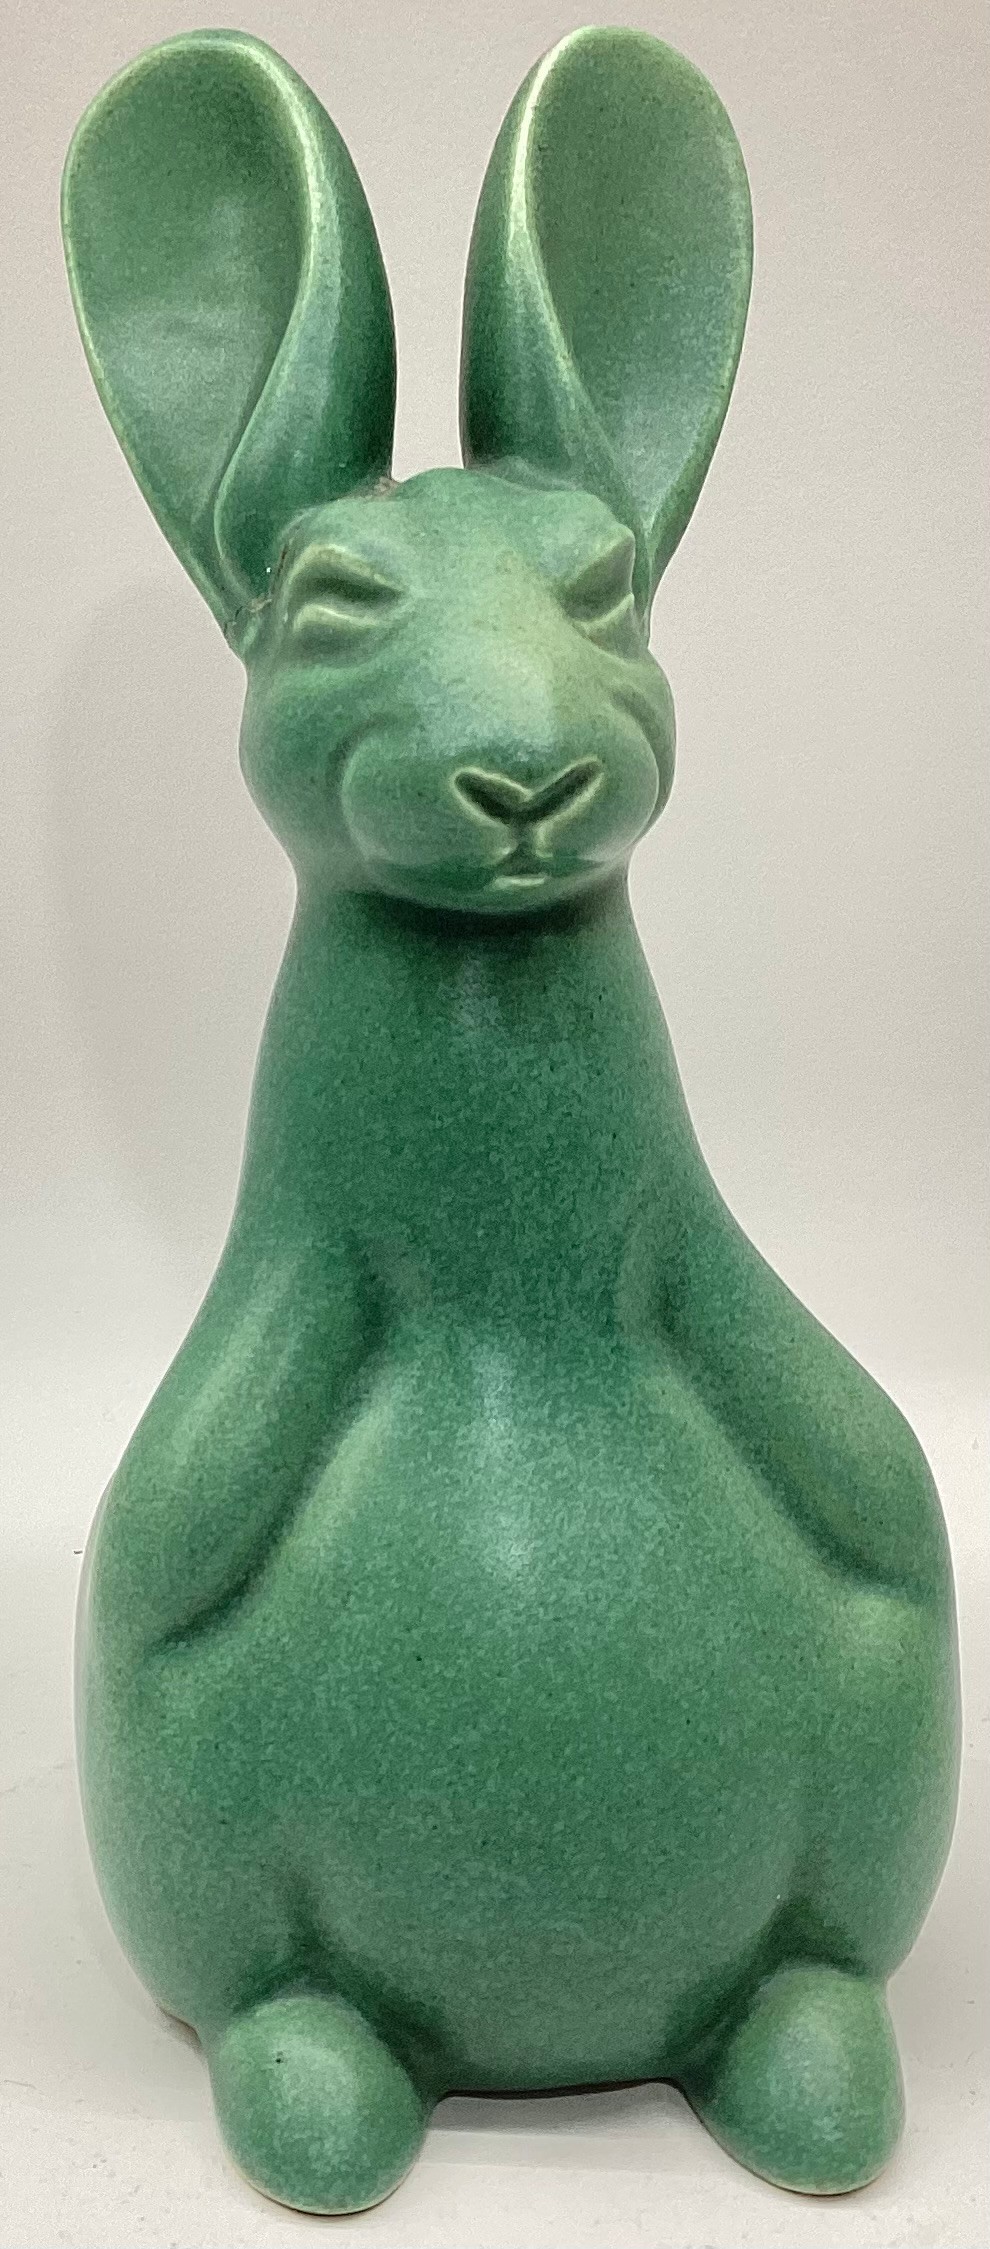 Poole Pottery large well fed rabbit/hare size 3, ear damage 5.8" high.